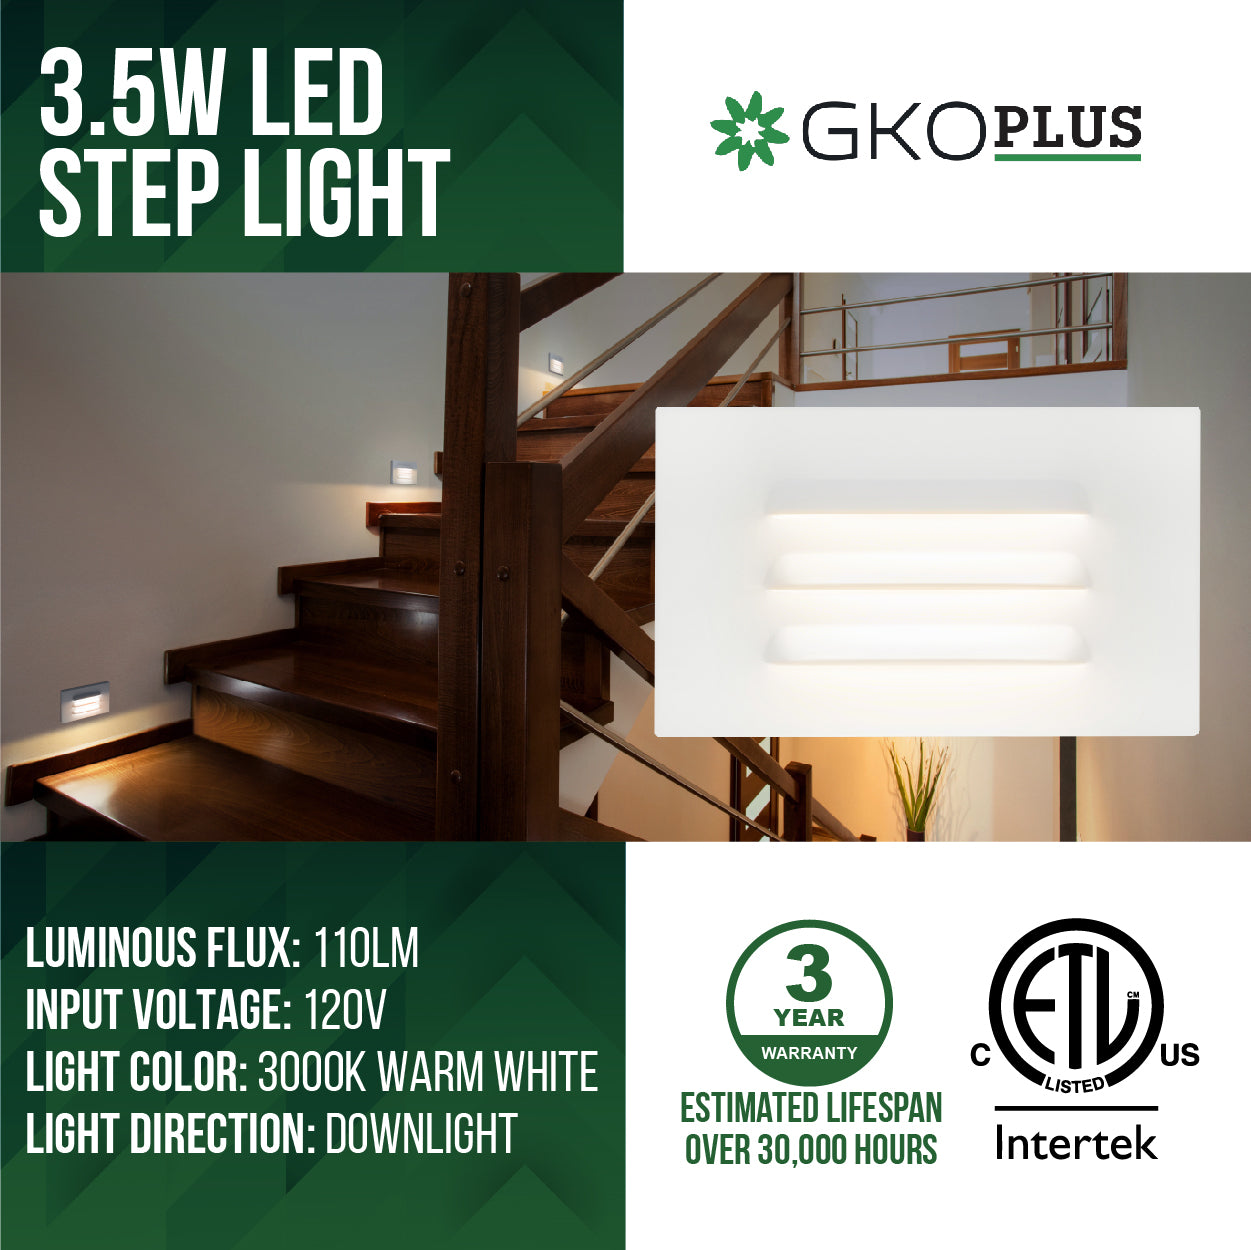 Line Voltage Louvered Dimmable Step Light, 120V, 3.5W, 110LM, 4.72" x 2.87" x 0.39", ETL Listed, White